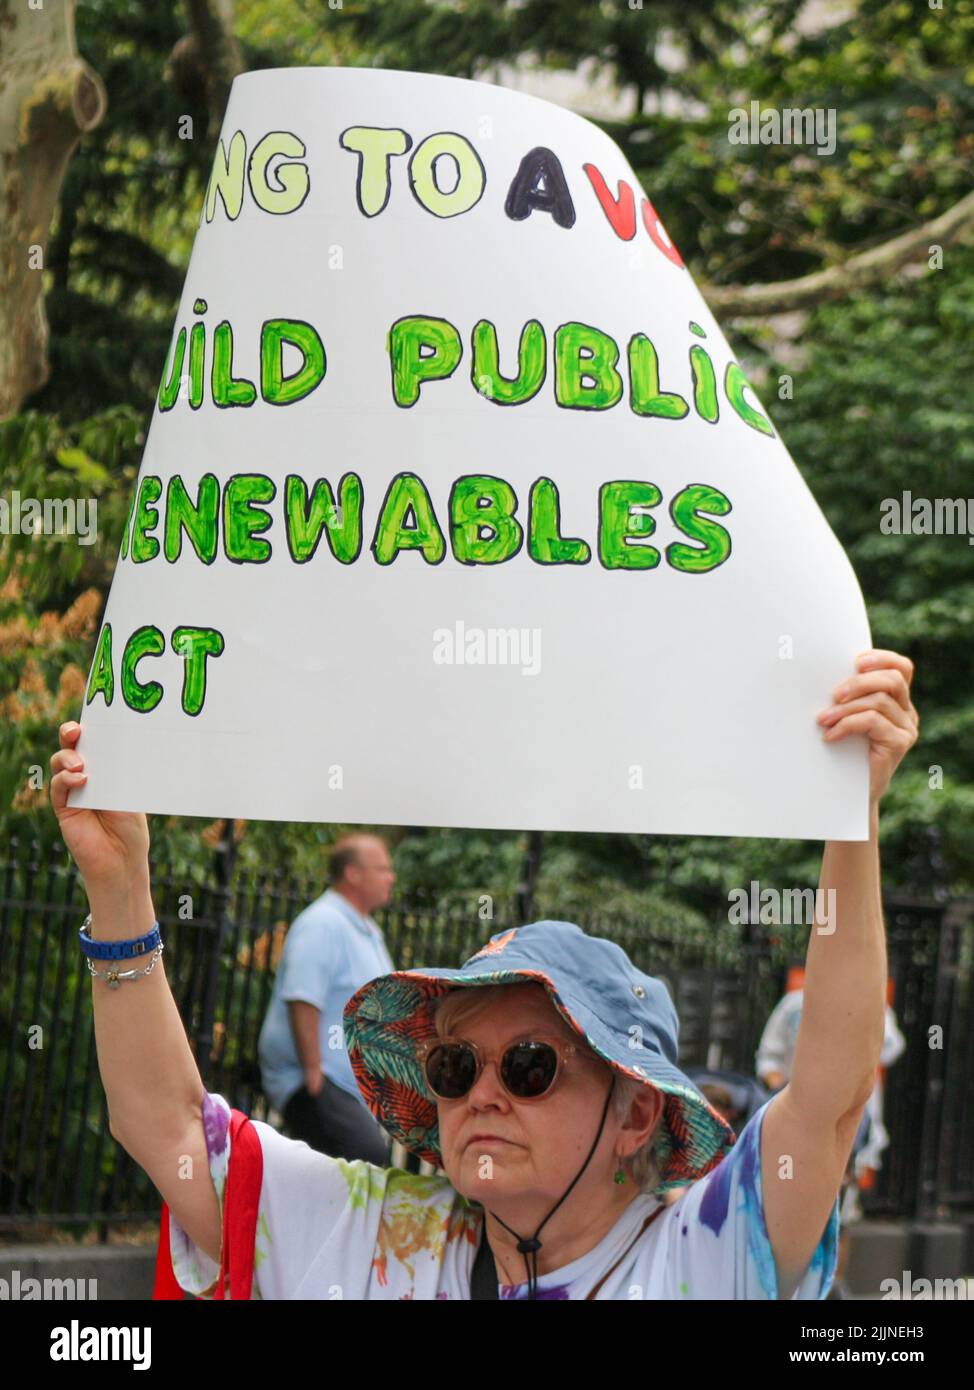 Demonstrator holds a sign in front of the City Hall in New York City demanding public renewables for climate justice on July 27, 2022. Stock Photo